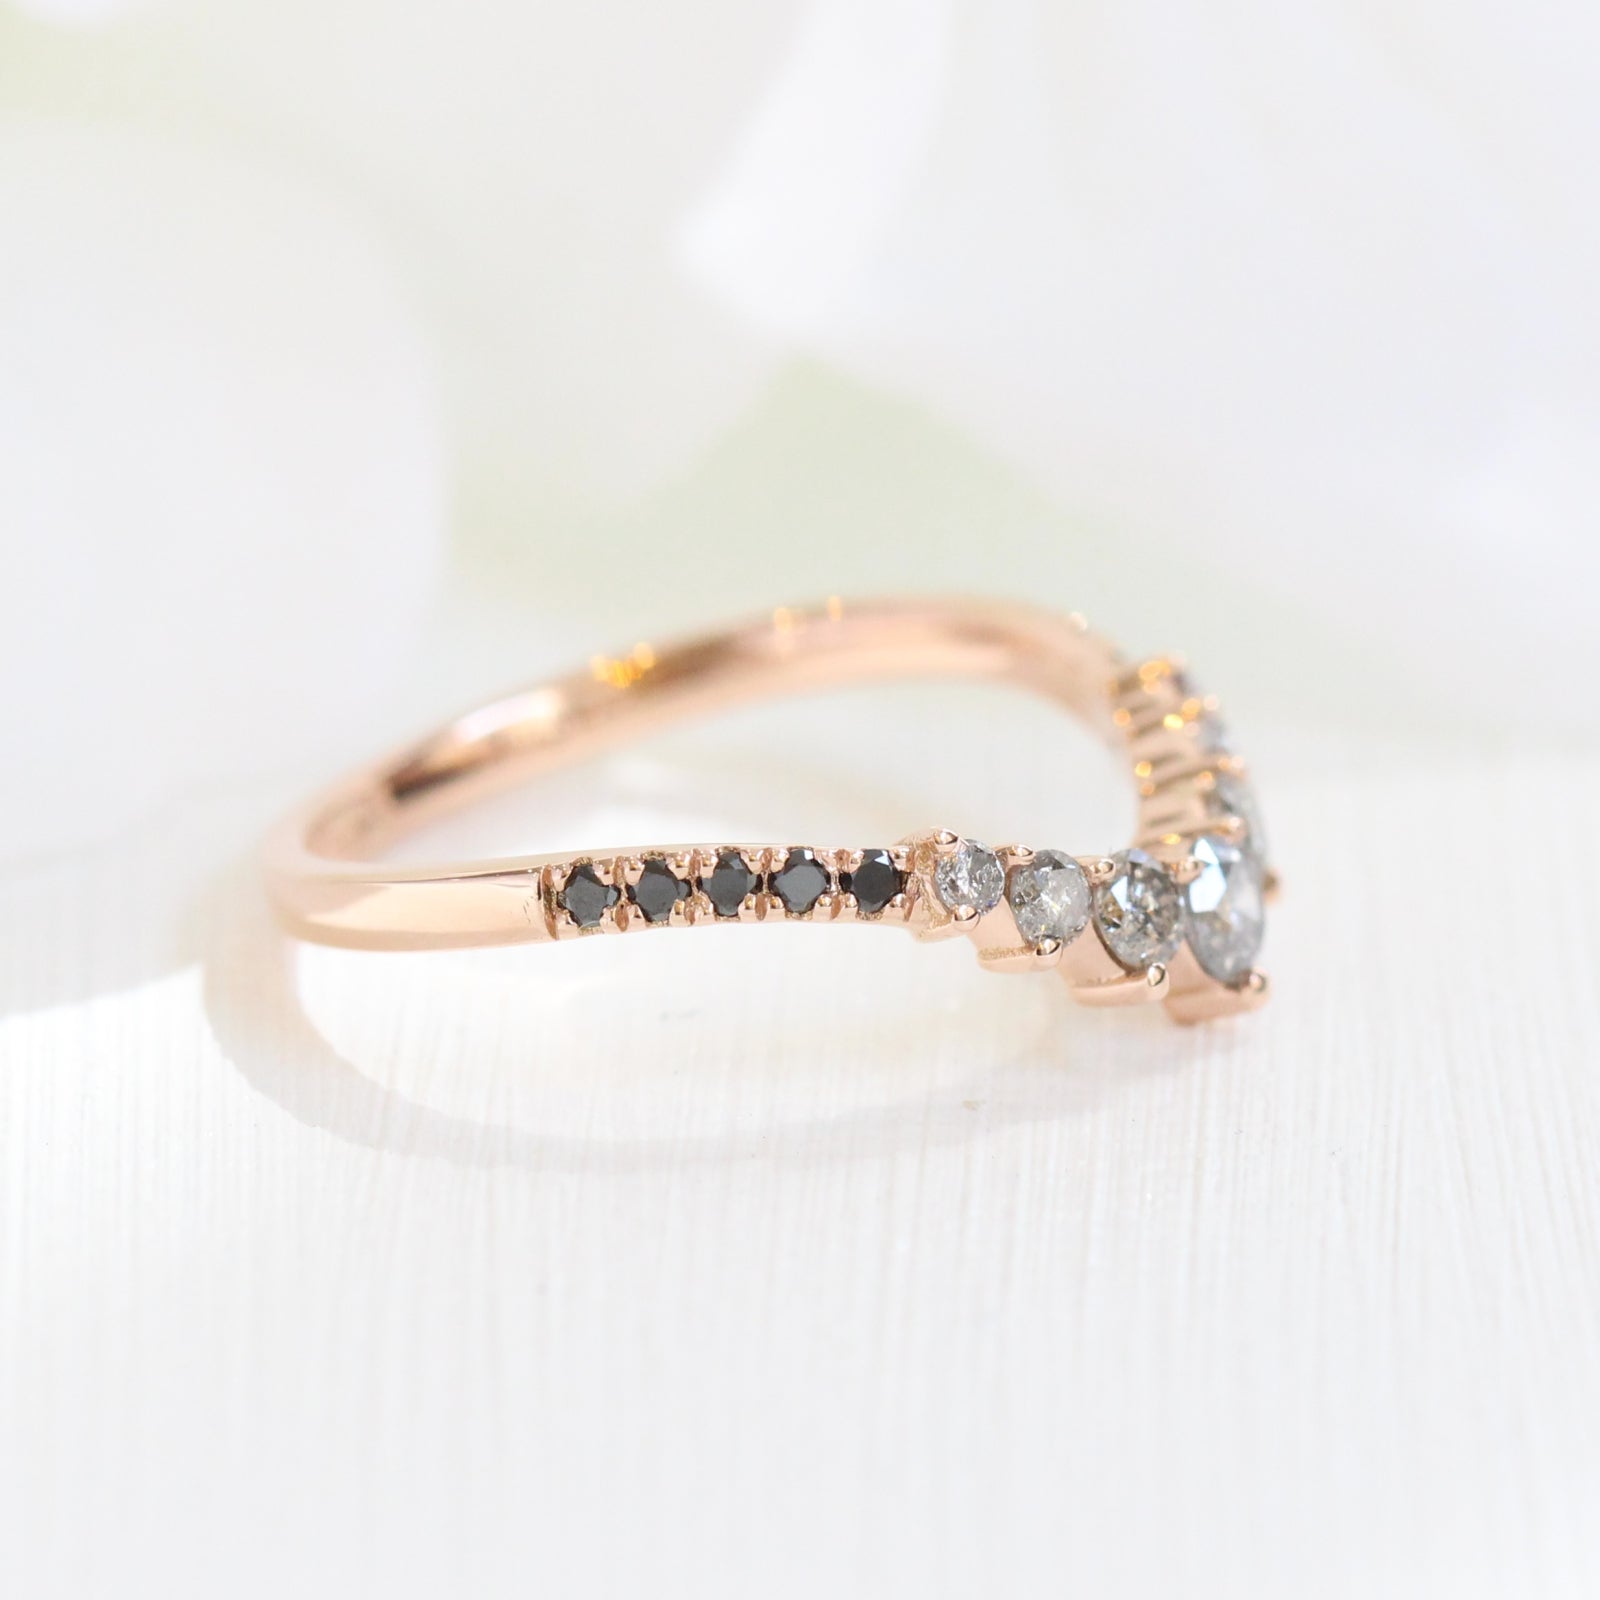 grey salt and pepper diamond wedding ring in rose gold curved pave black diamond band by la more design jewelry